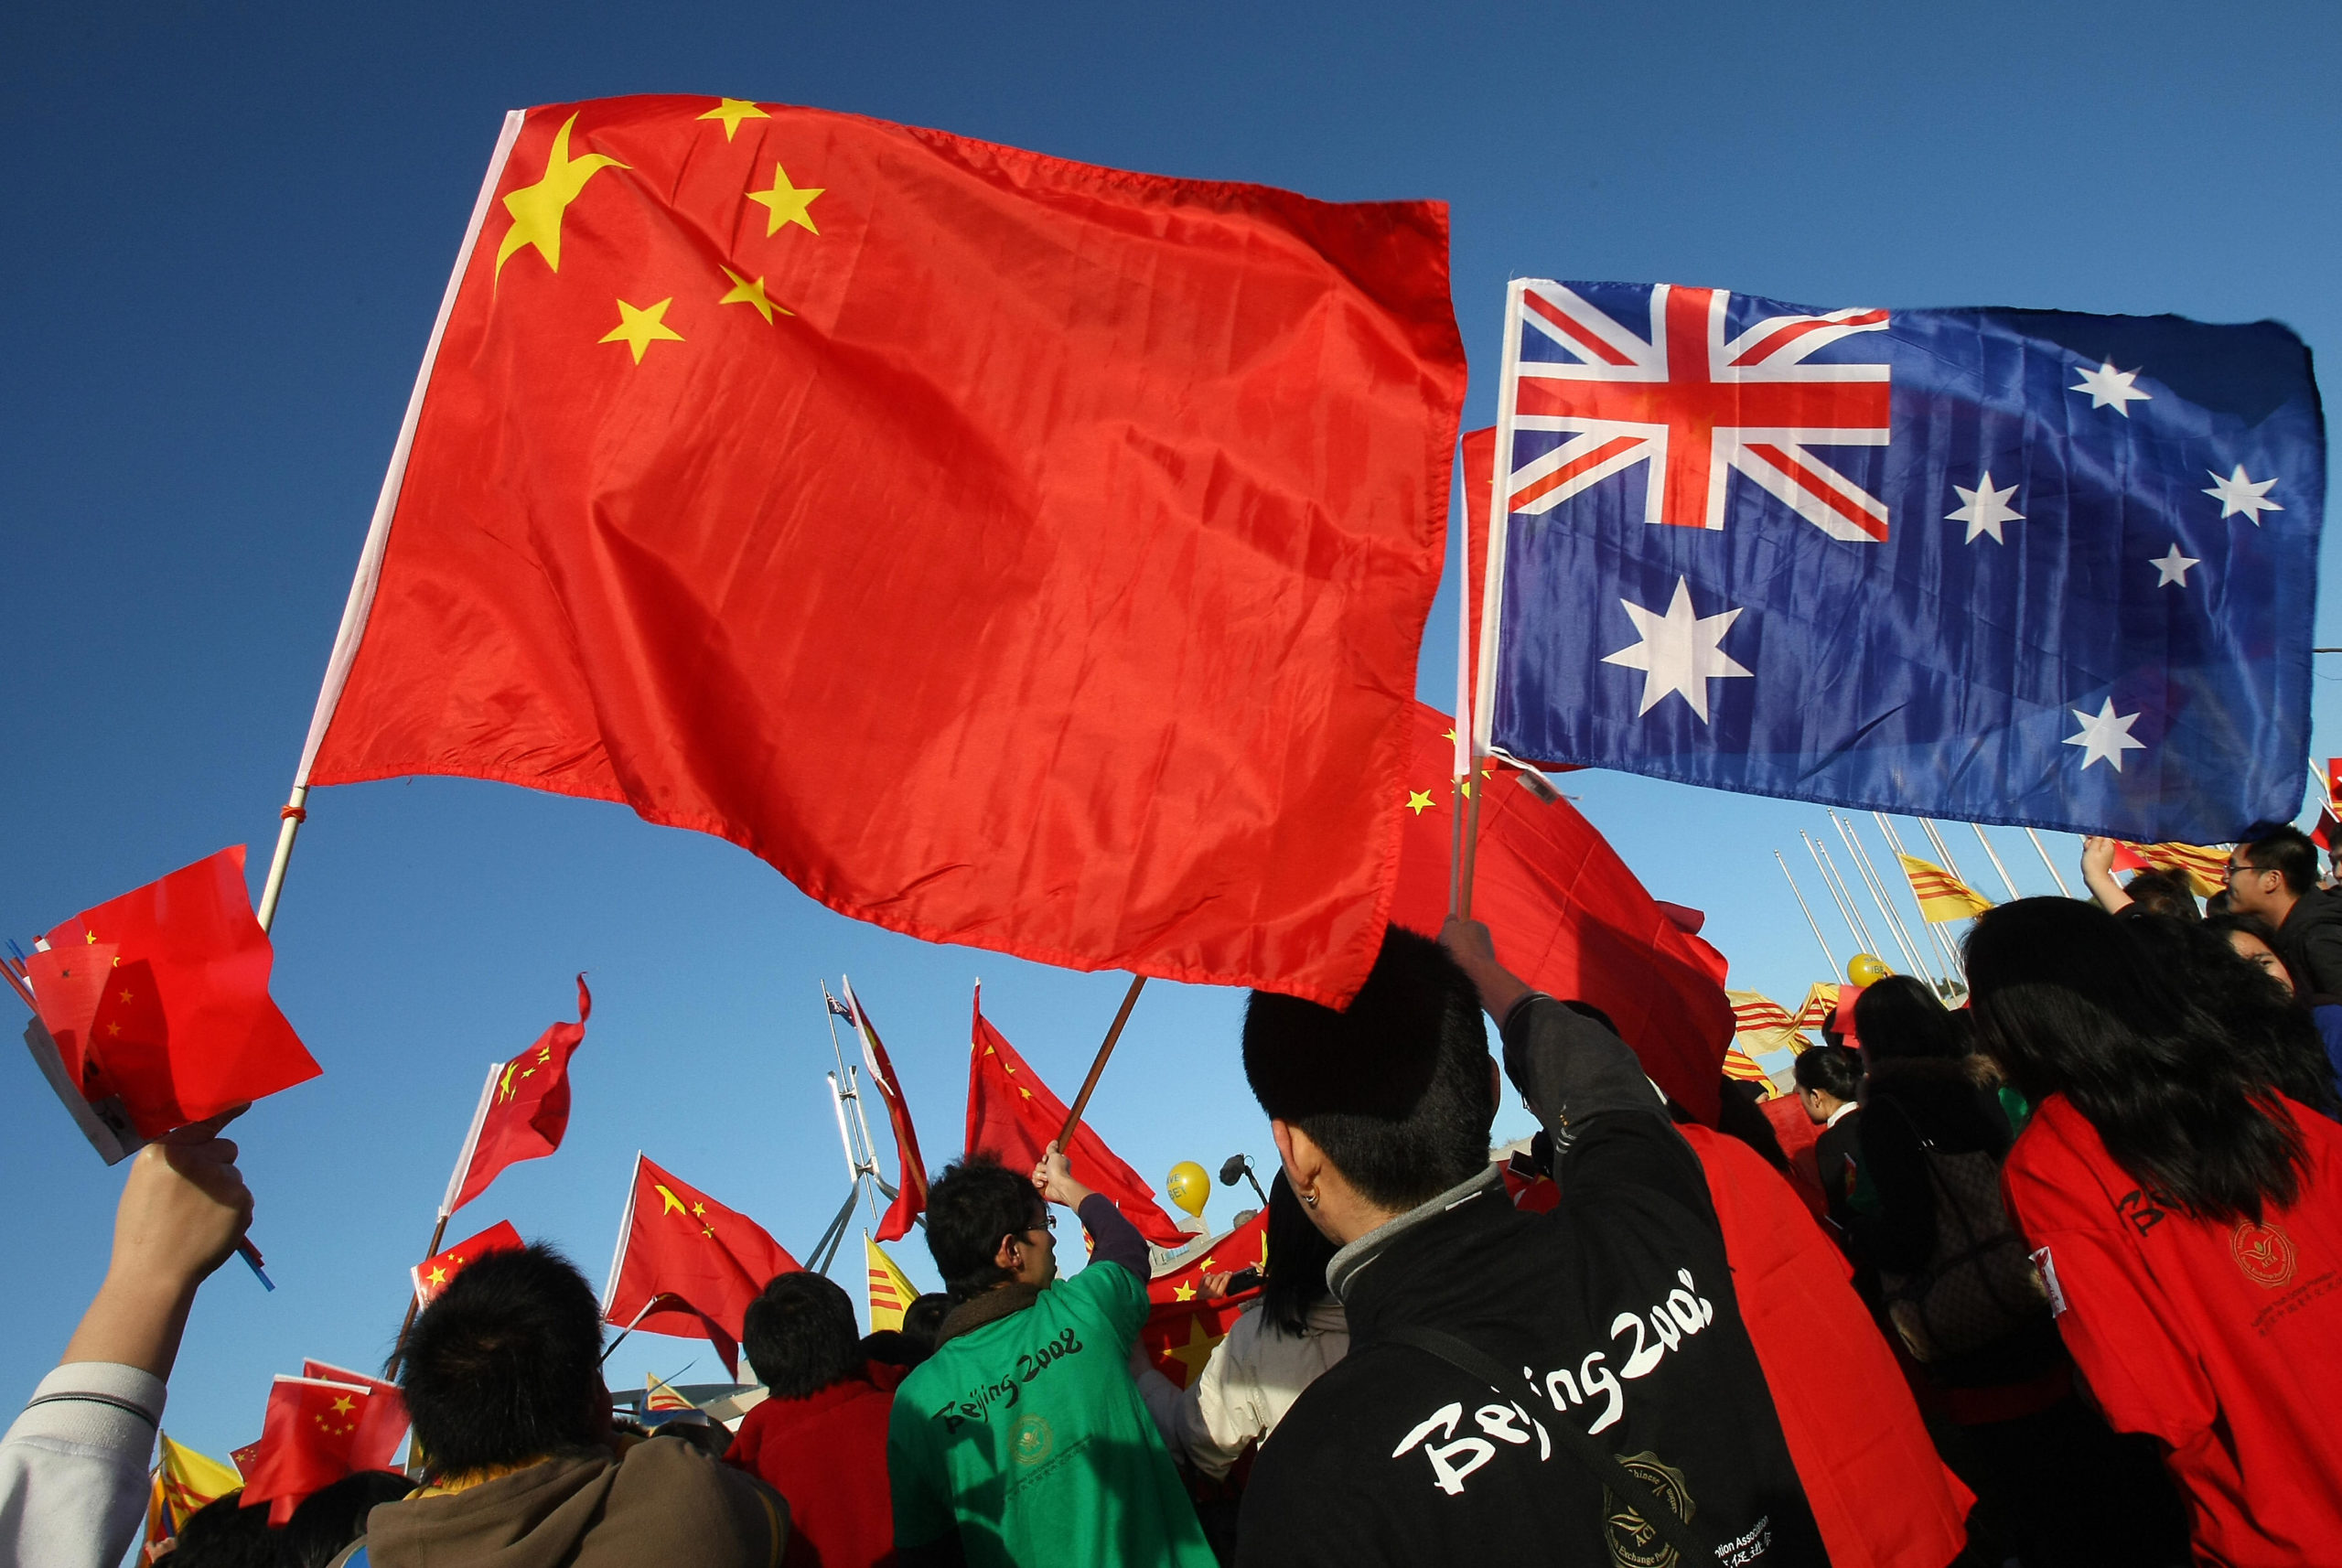 Australia and China want to search out frequent floor, former Australian prime minister says